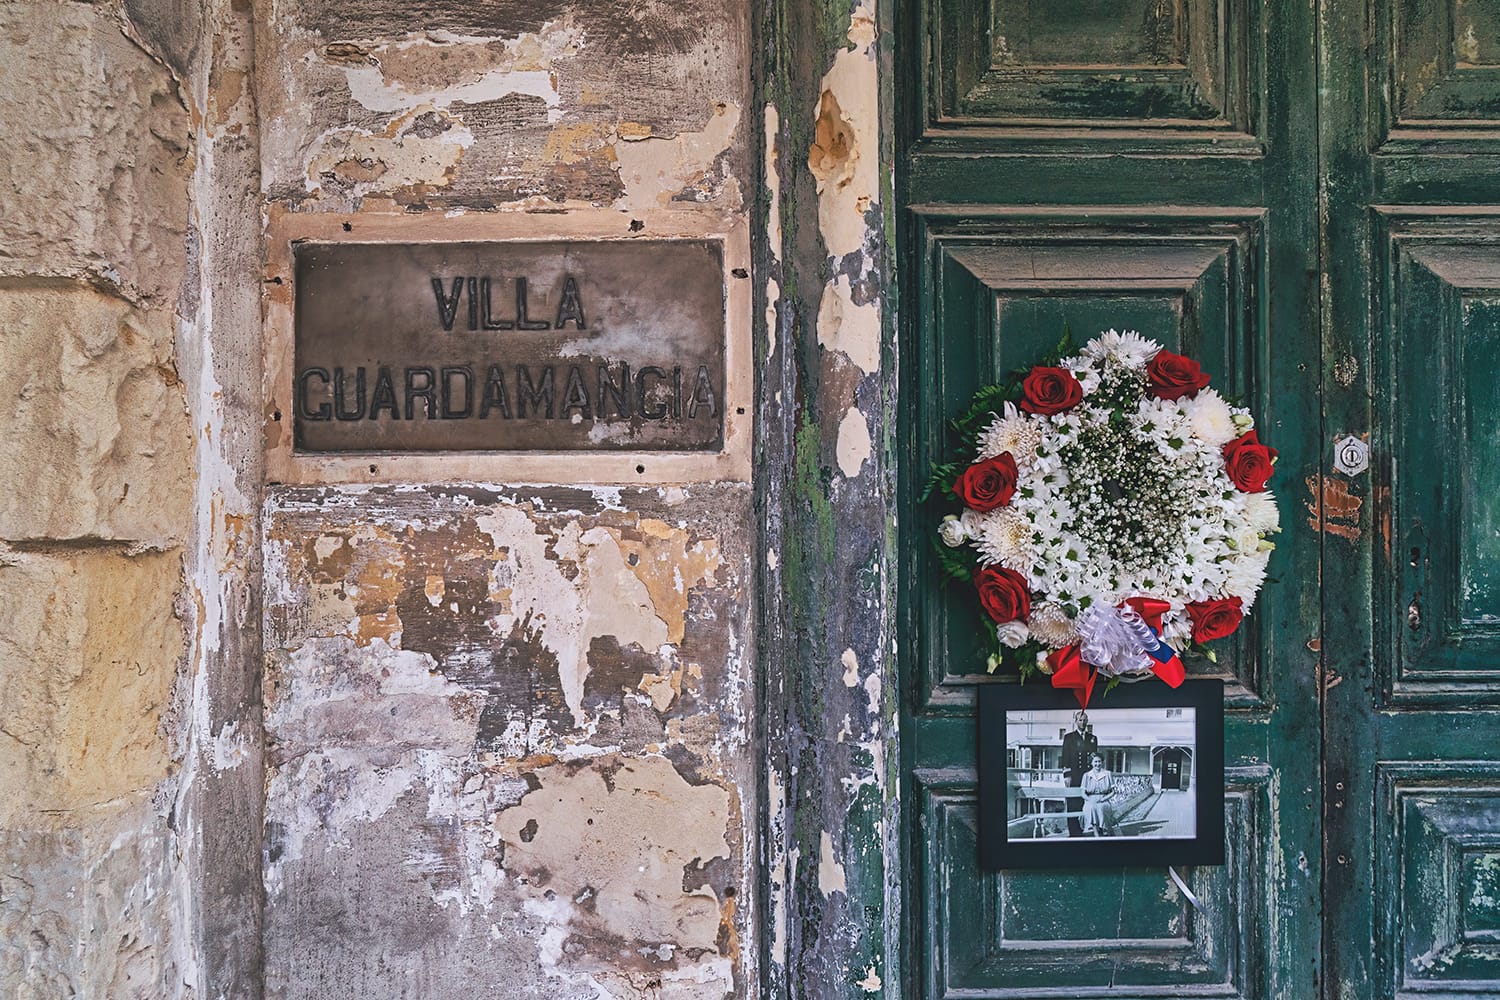 Villa Guardamangia, former home of Britain's Queen Elizabeth, when she lived in Malta between 1949-1951. Wreath and flowers near door in connection with her death: Pieta, Malta